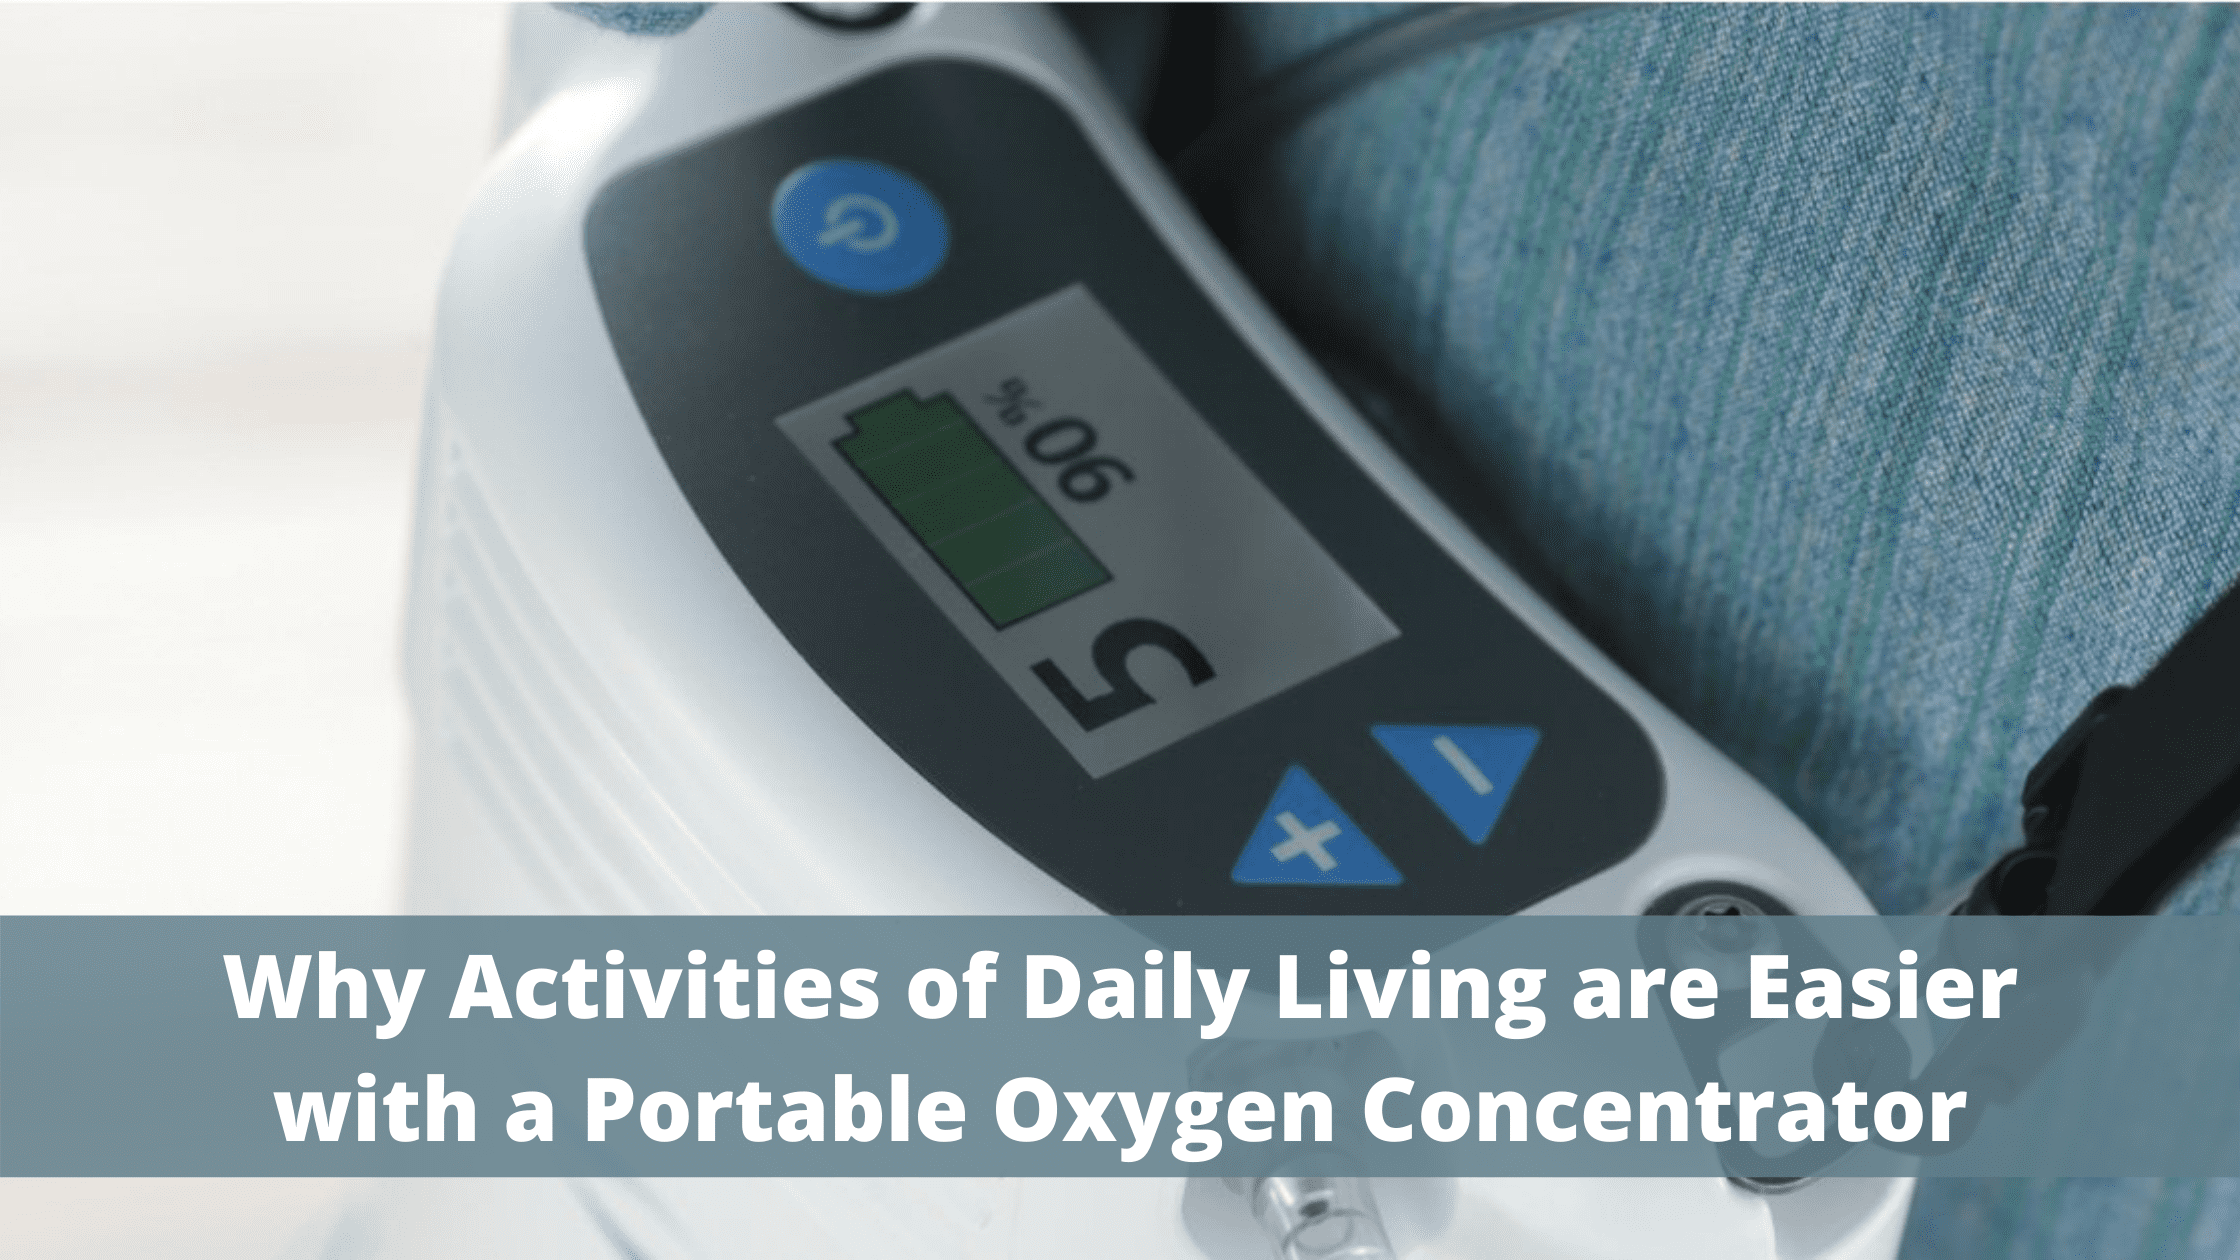 Why Activities of Daily Living are Easier with a Portable Oxygen Concentrator